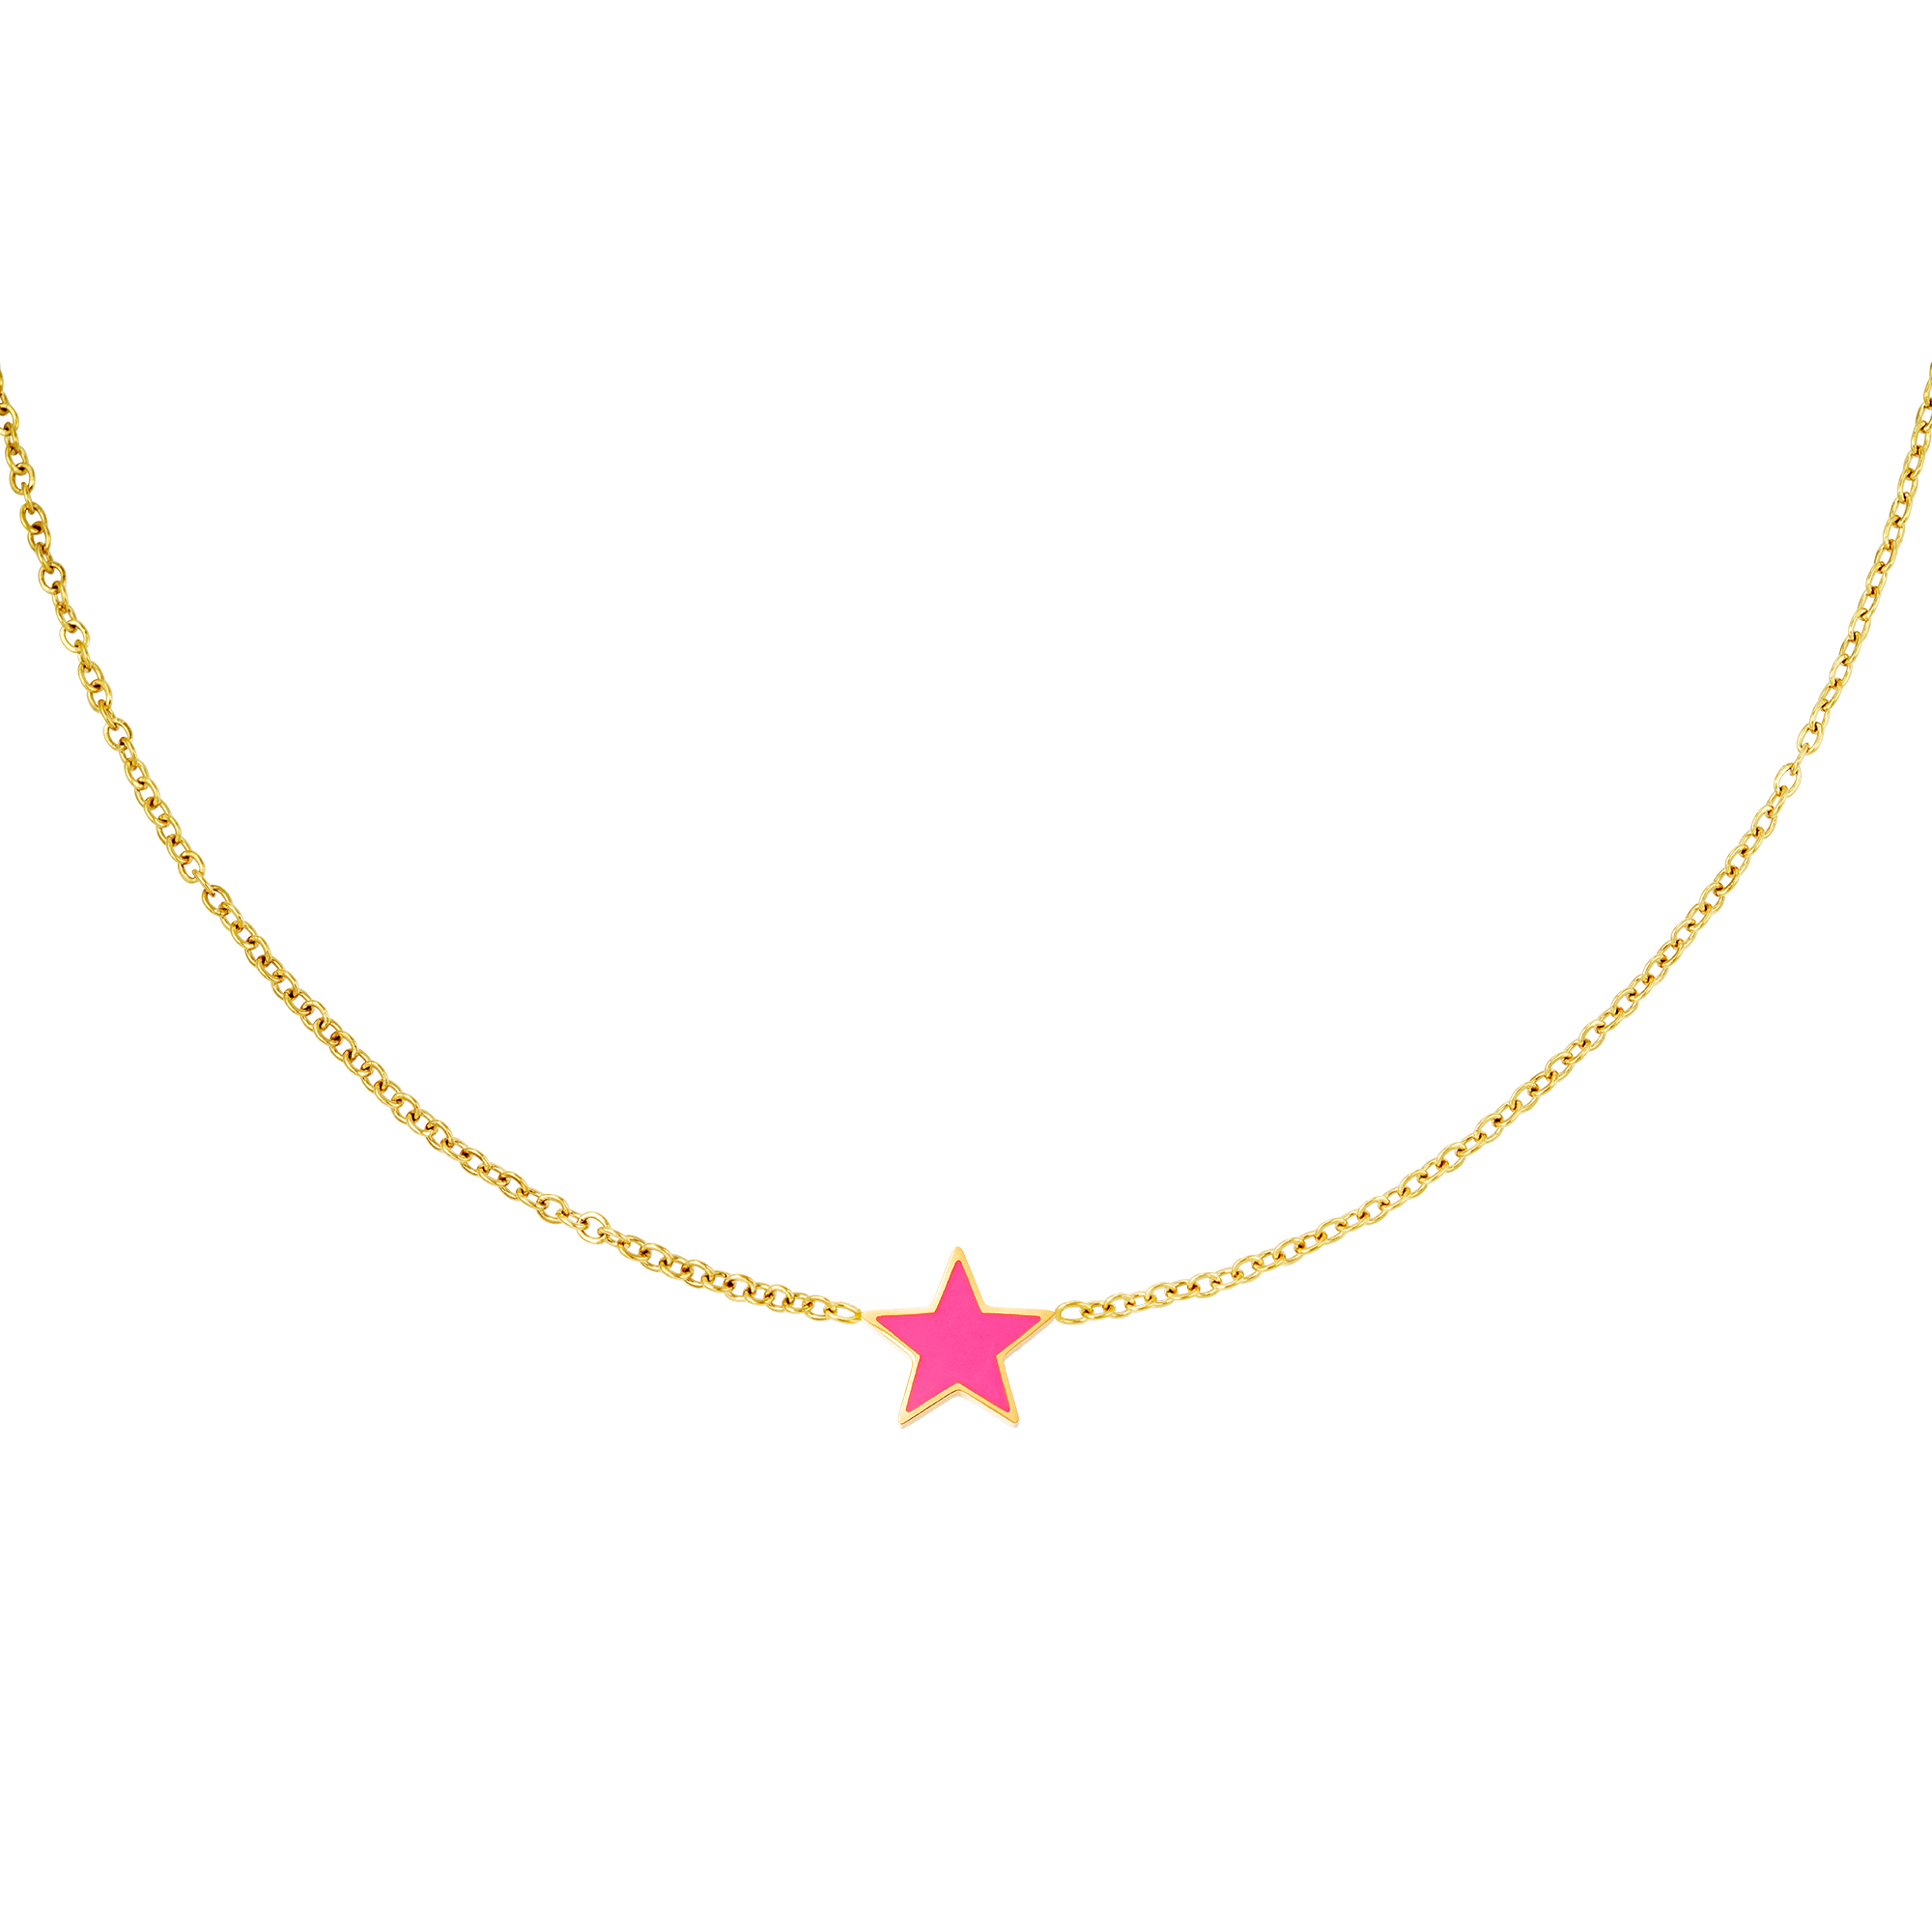 Stainless steel necklace star